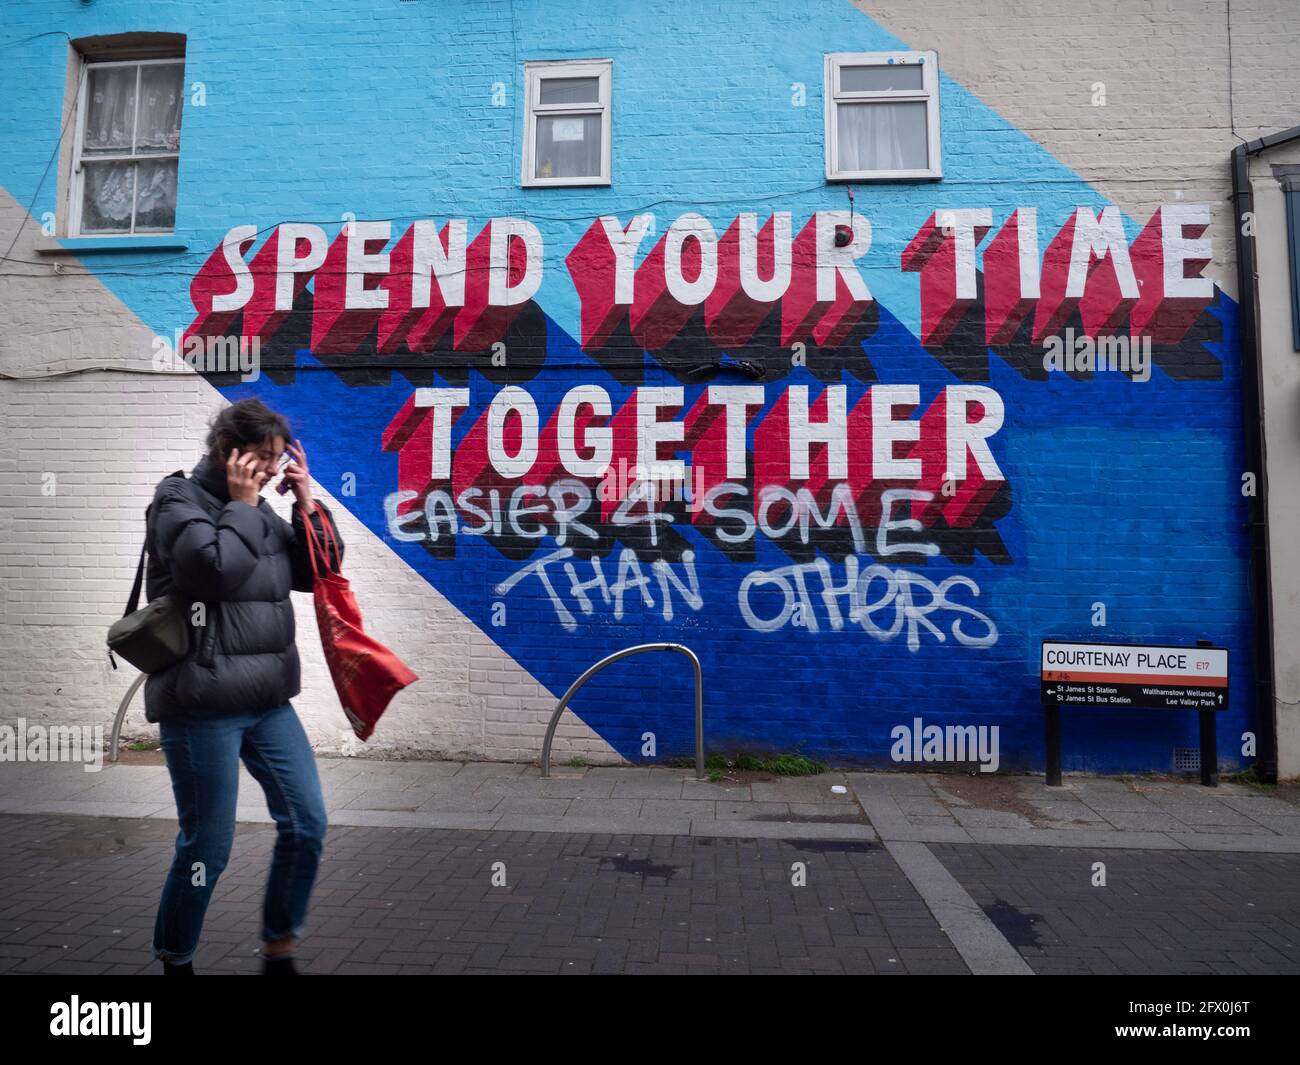 Graffiti Walthamstow High Street, London reading Spend your time together and easier for some than others Stock Photo